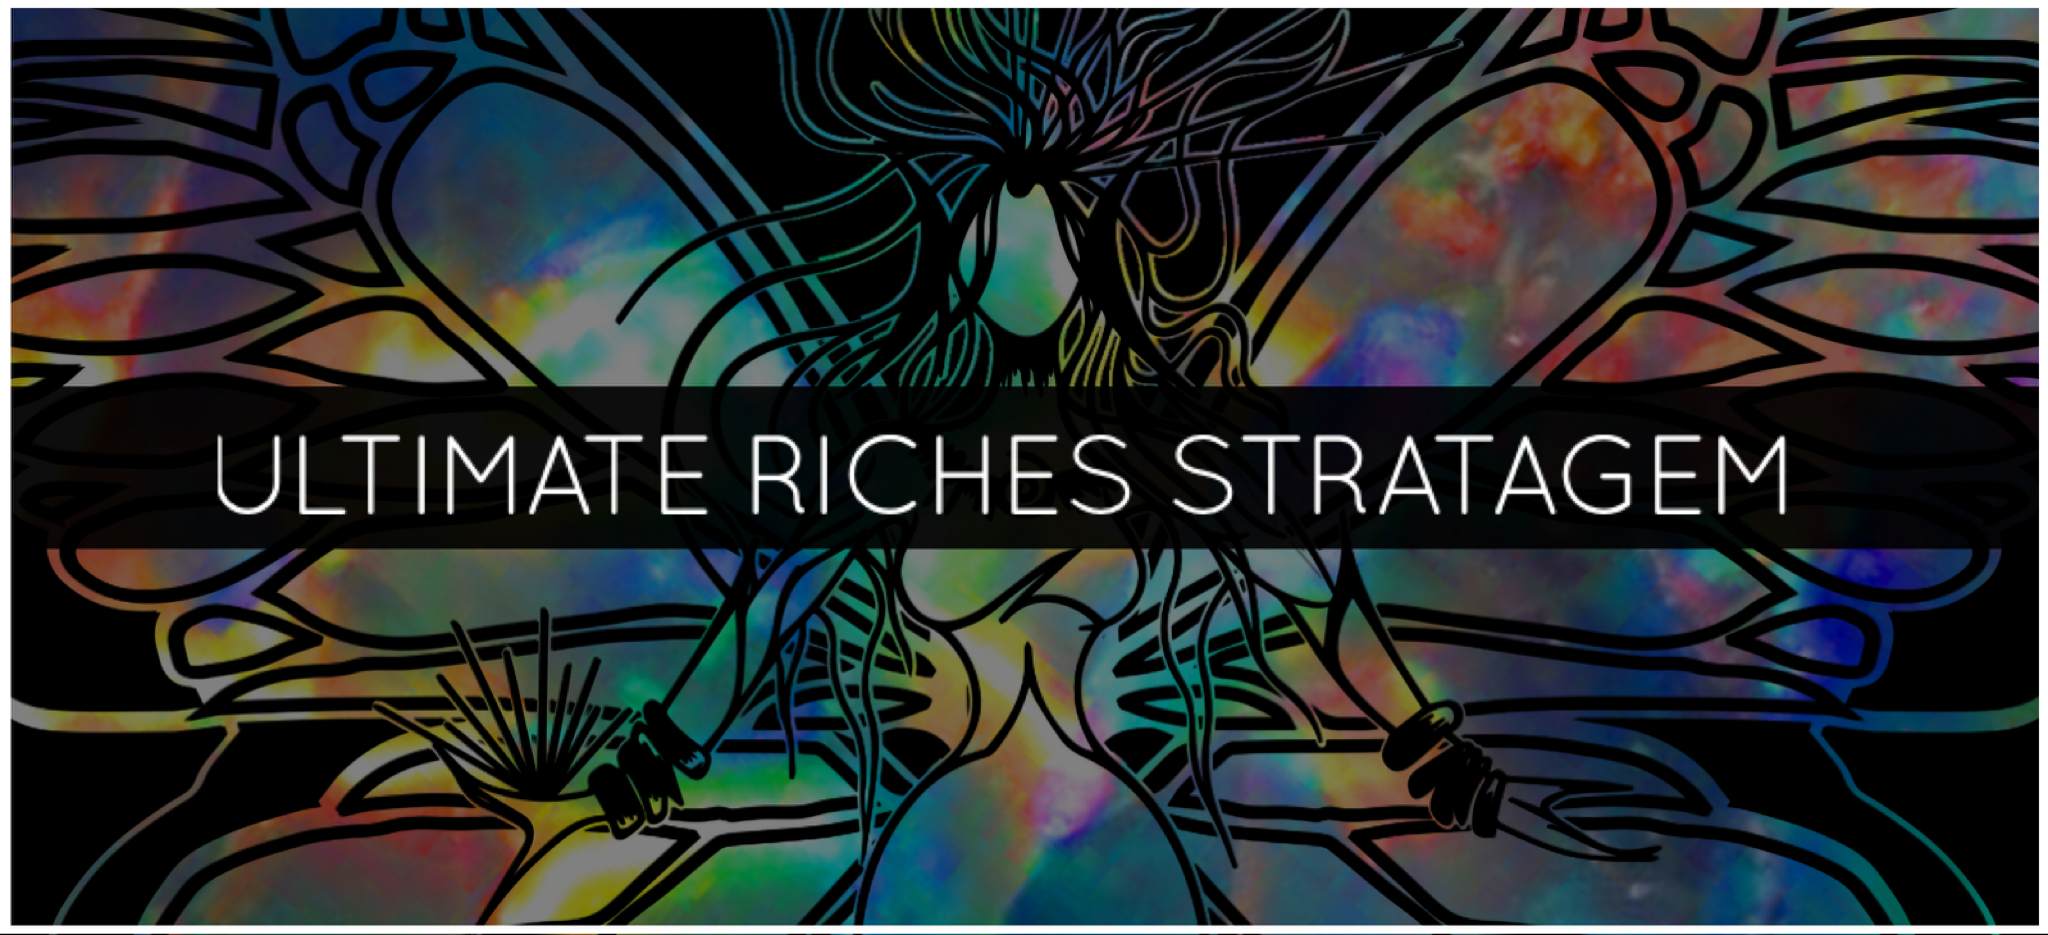 ULTIMATE RICHES STRATAGEM